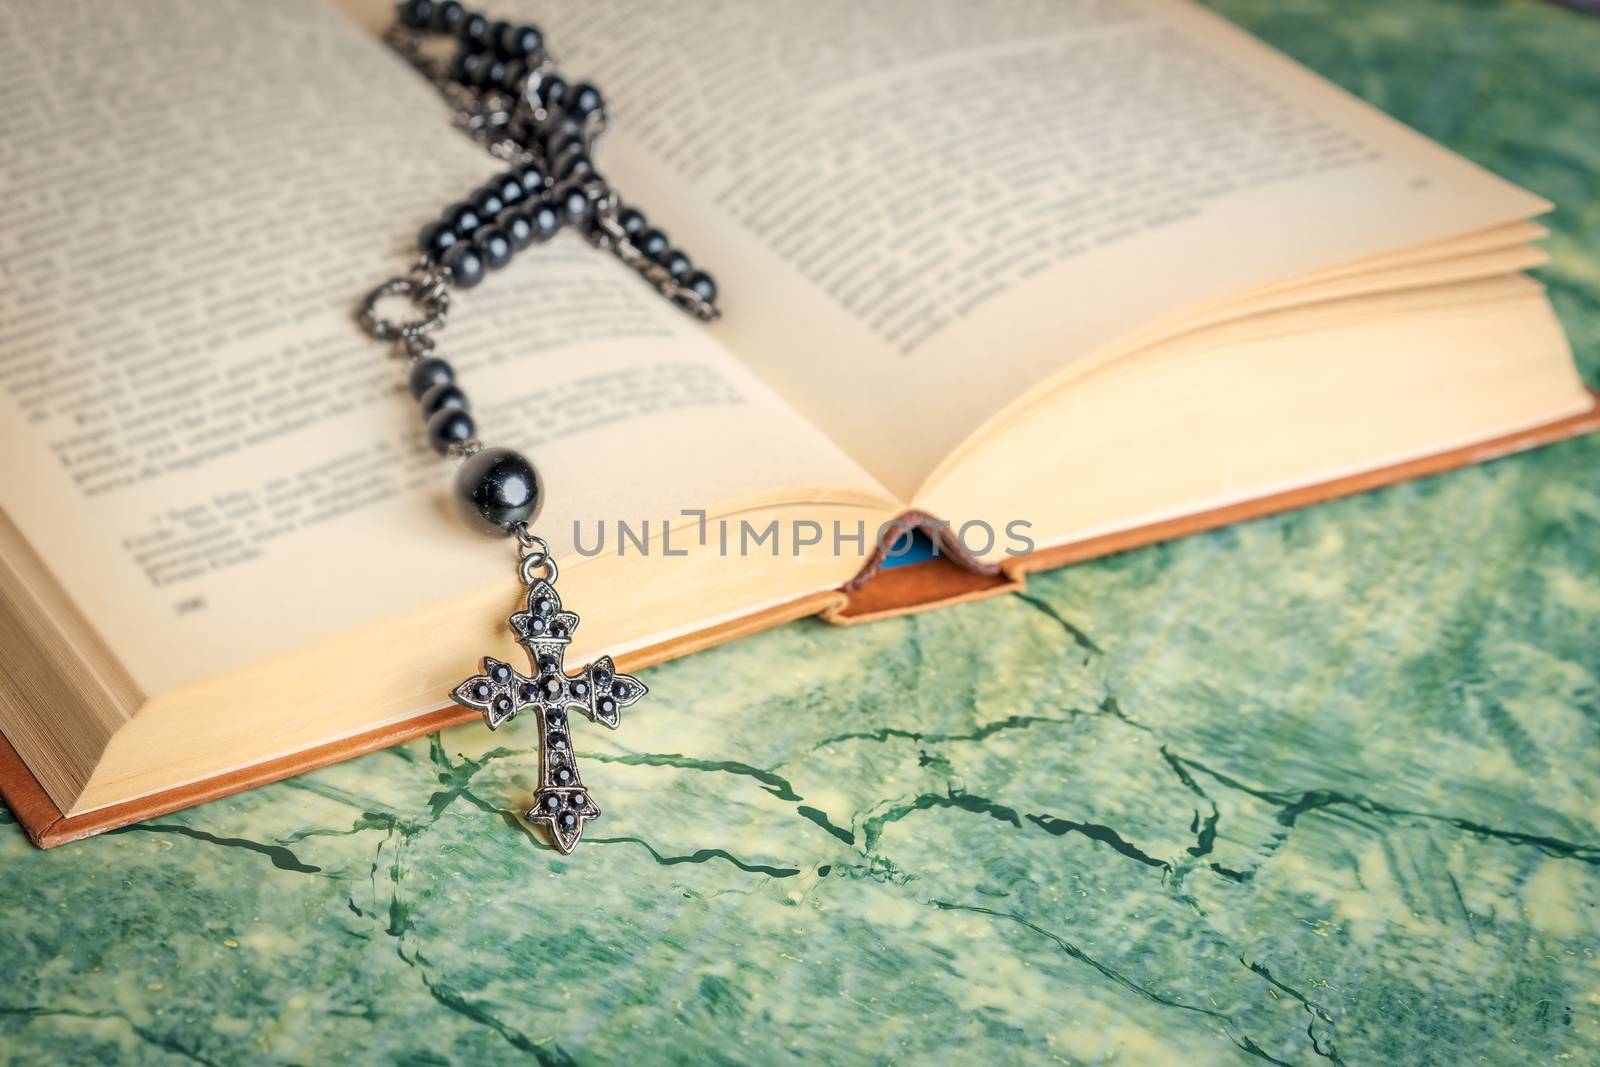 Religion at school rosary and cross by Robertobinetti70